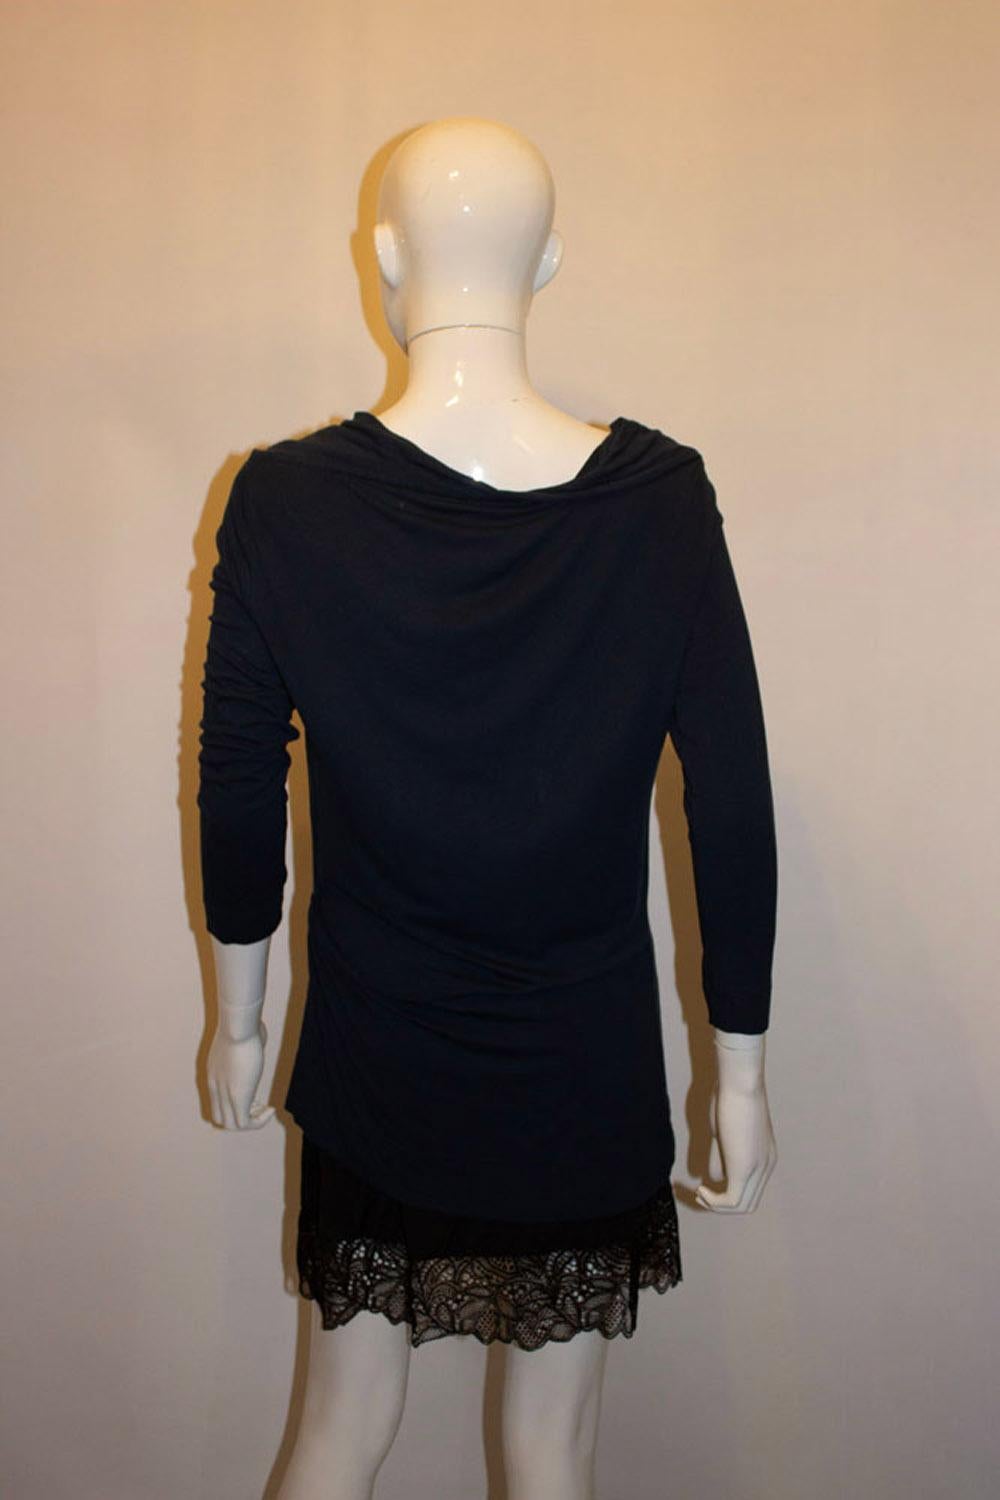 A wonderful , and easy to wear cotton jersey top by  the late British designer Vivienne Westwood. The top has a cowl neckline, long sleaves and detail on the right hand side. Size XL Measurements: 
Bust 37'', length 24''